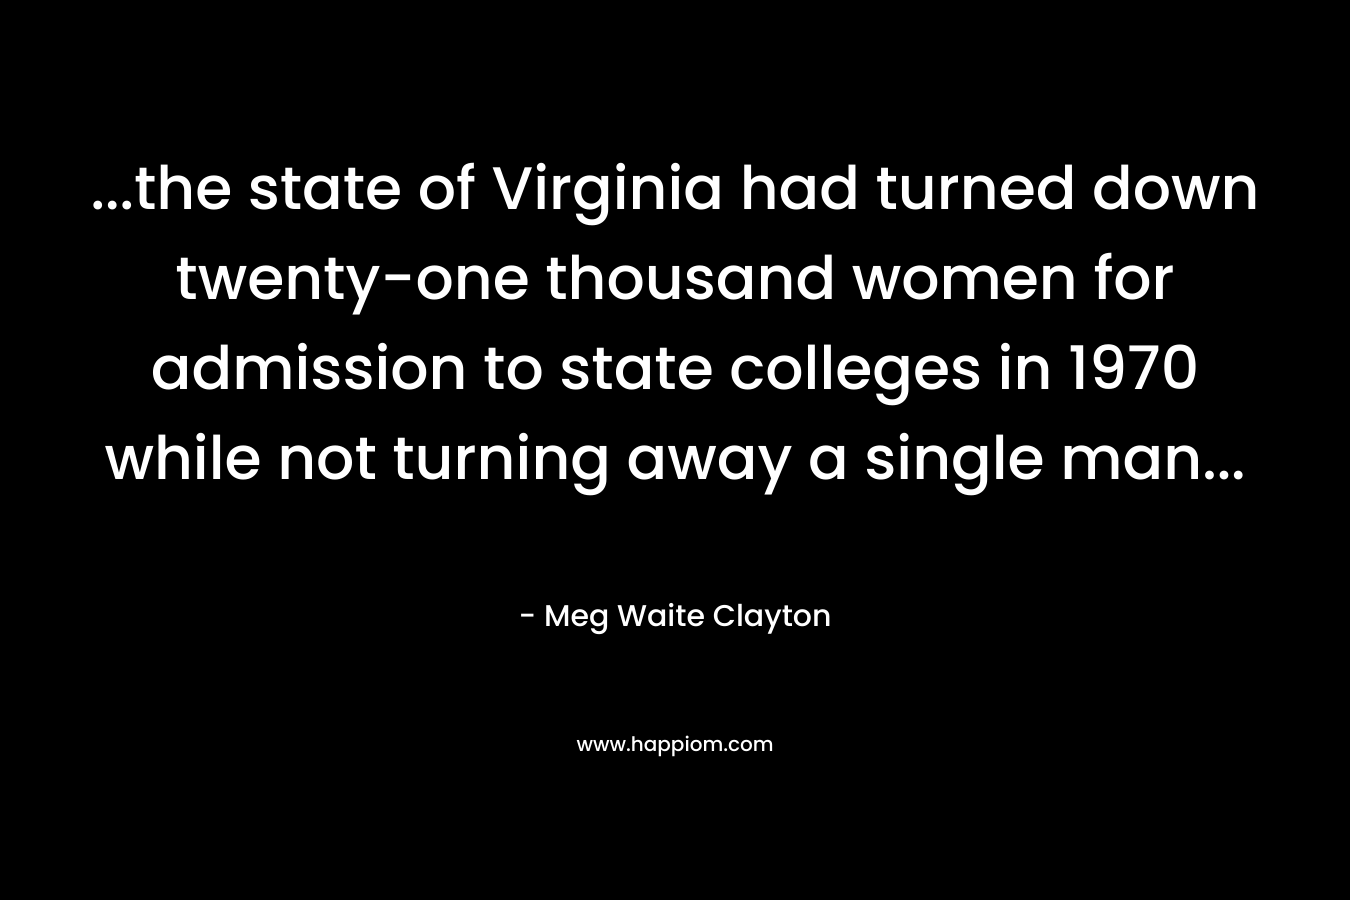 …the state of Virginia had turned down twenty-one thousand women for admission to state colleges in 1970 while not turning away a single man… – Meg Waite Clayton